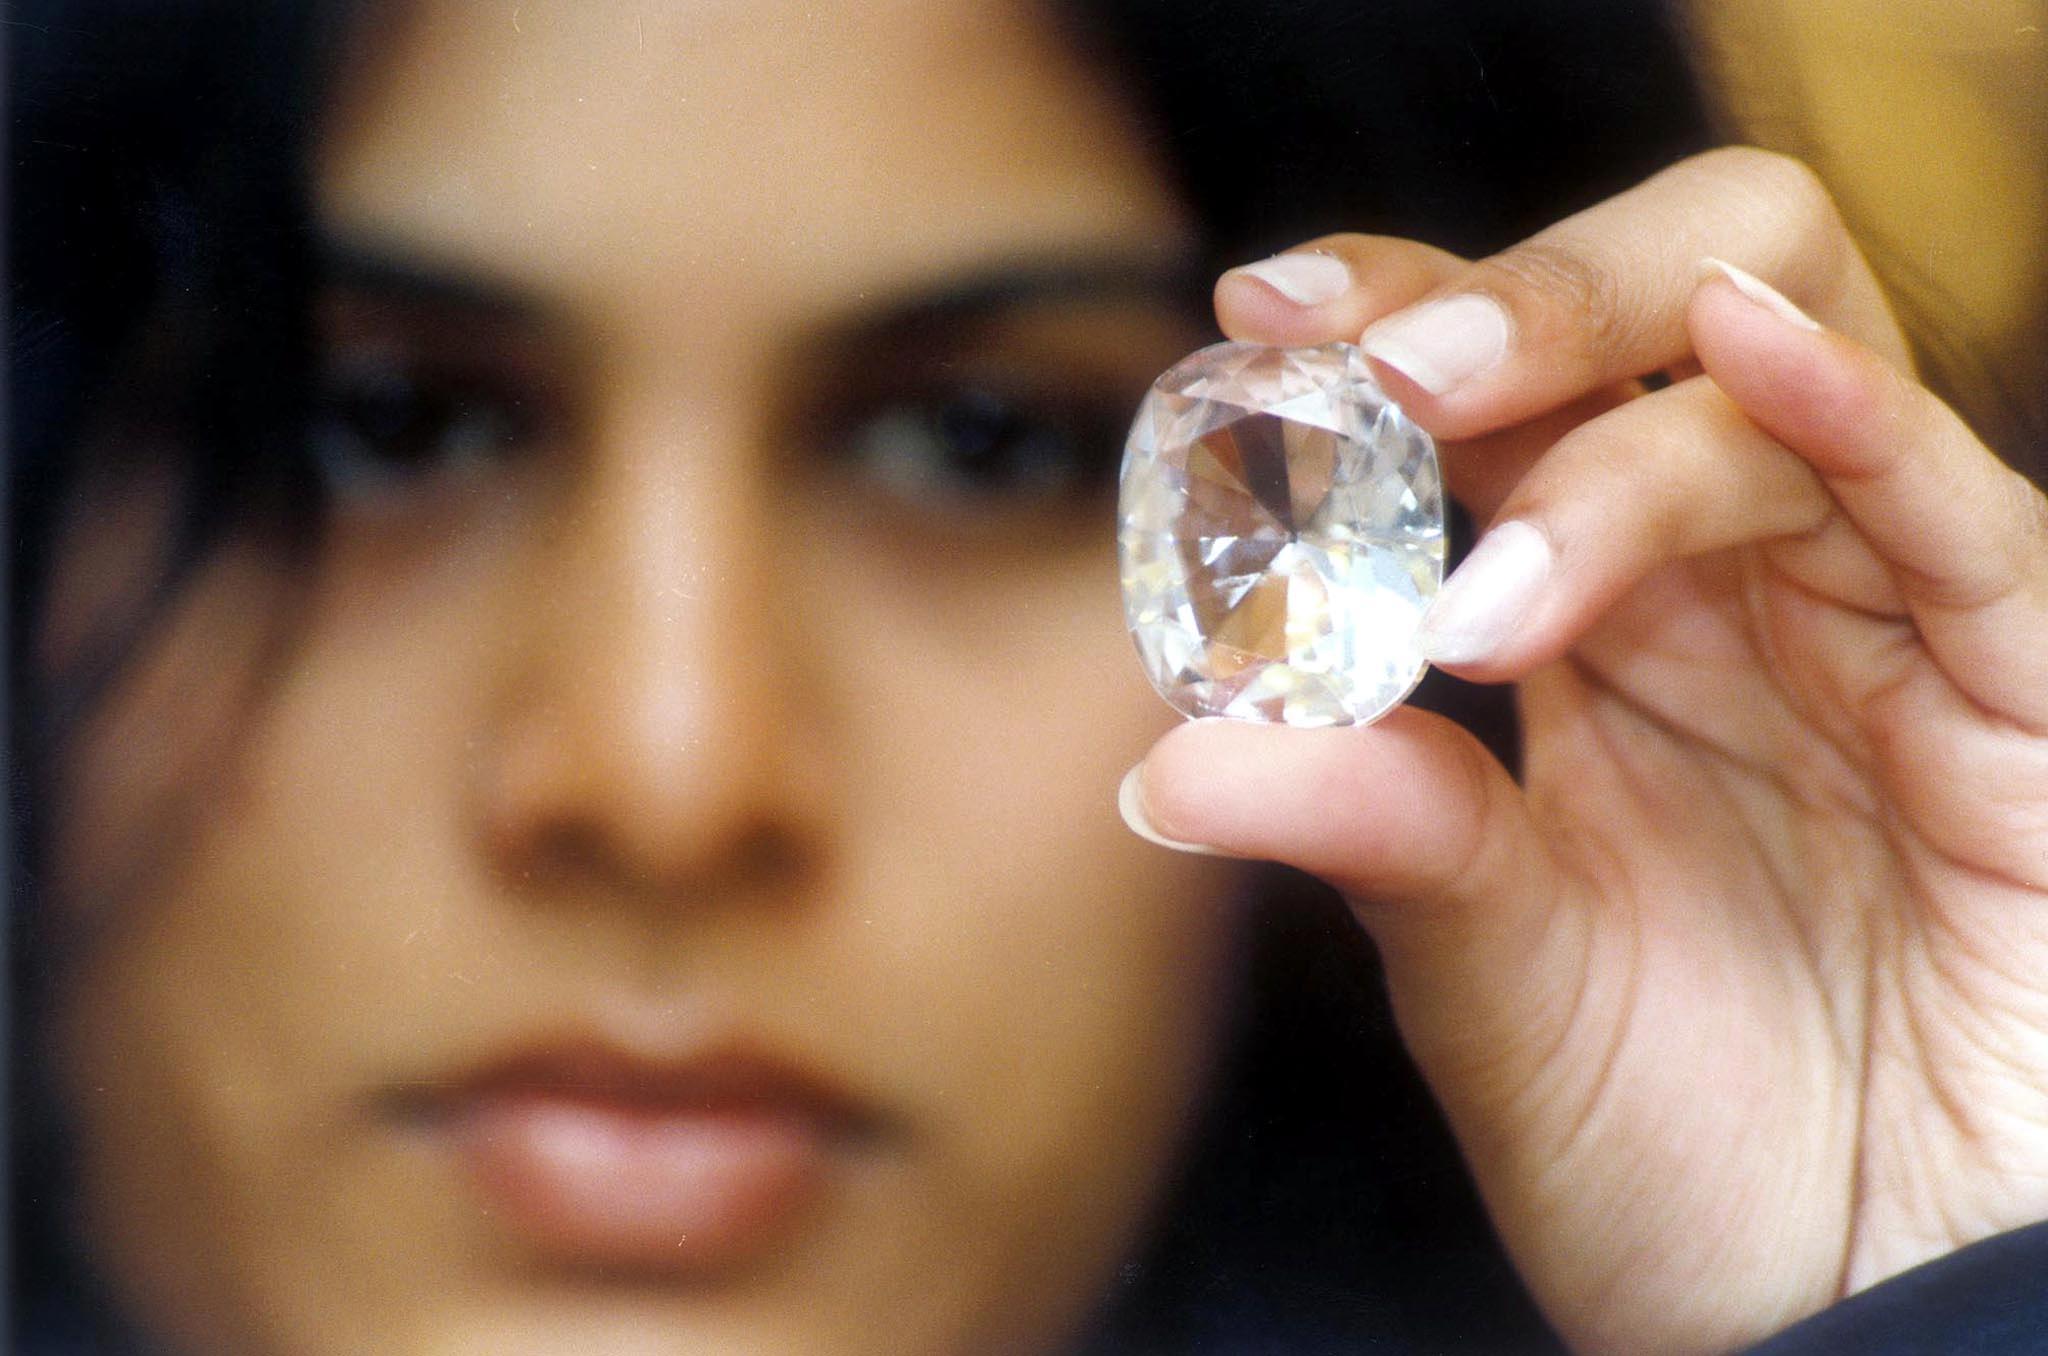 Executive Director of Jewels de Paragon (JDP) Pavana Kishore shows the "Koh-I-Noor" diamond on display with other famous diamonds at an exhibition intitled "100 World Famous Diamonds" in Bangalore 19 May 2002. The Koh-I-Noor diamond, which once belonged to Mughal Emperor Shah Jehan, weighs 105.60 Carats and is part of the British crown jewels, stored in the tower of London. AFP PHOTO / AFP PHOTO / STR